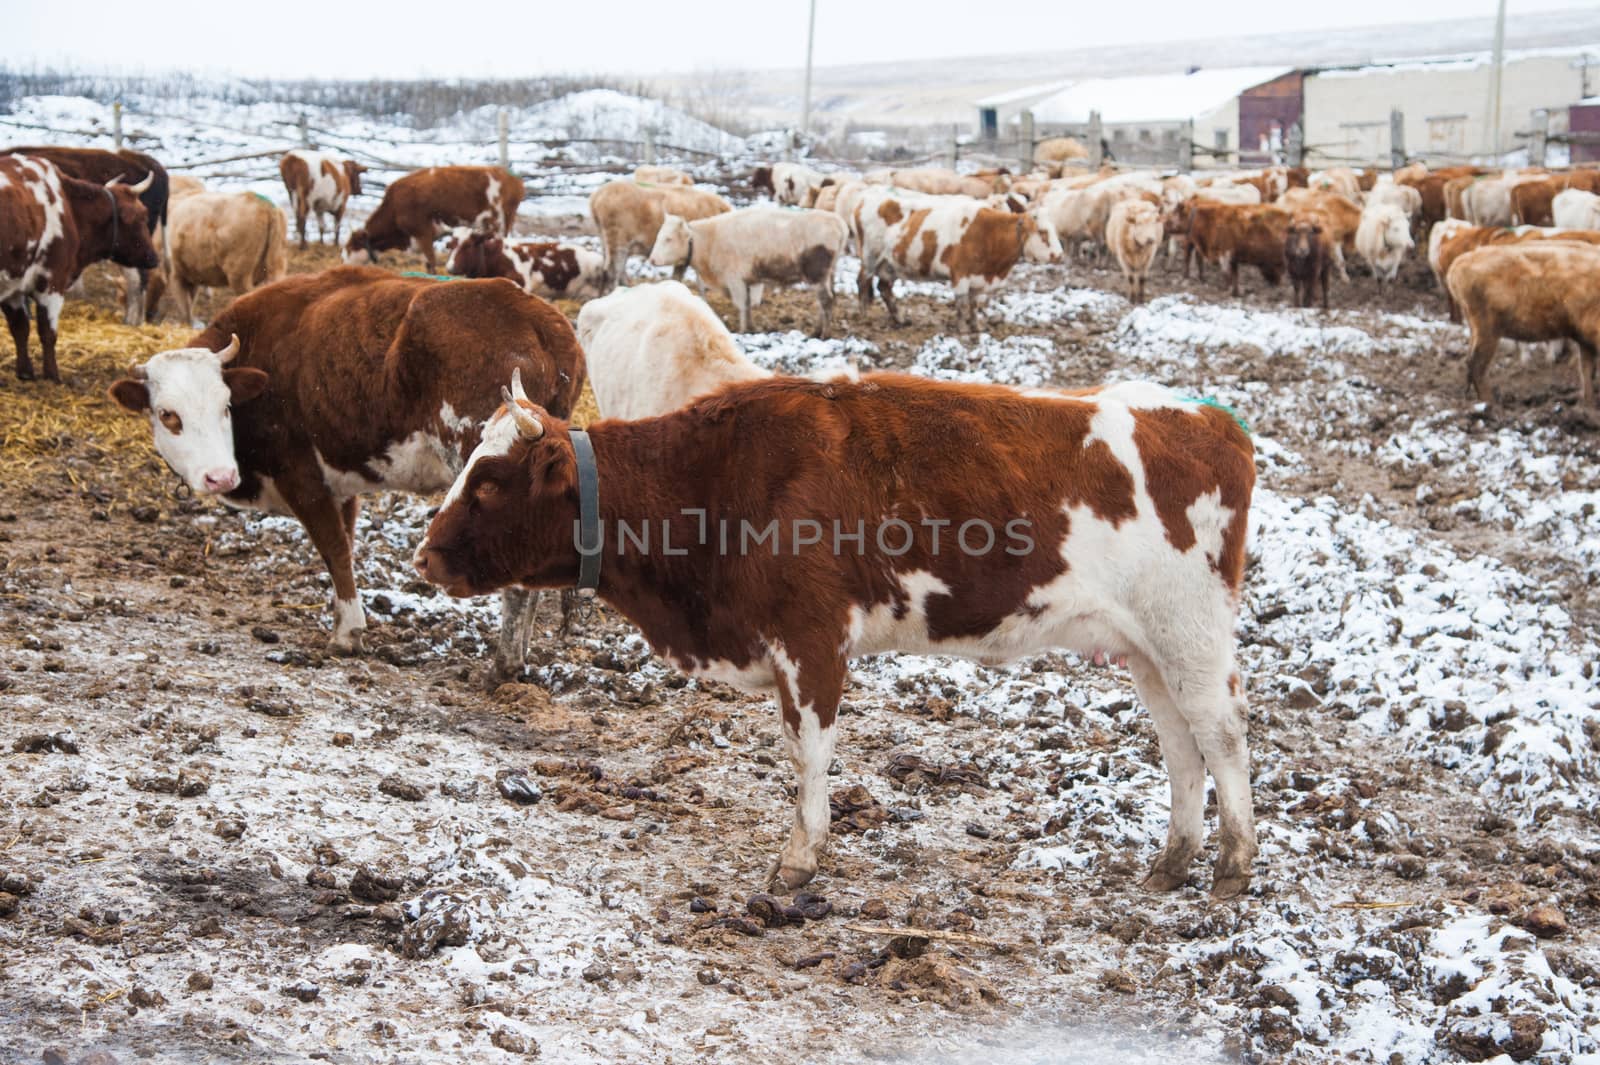 Cows on a farm in the winter by grigorenko